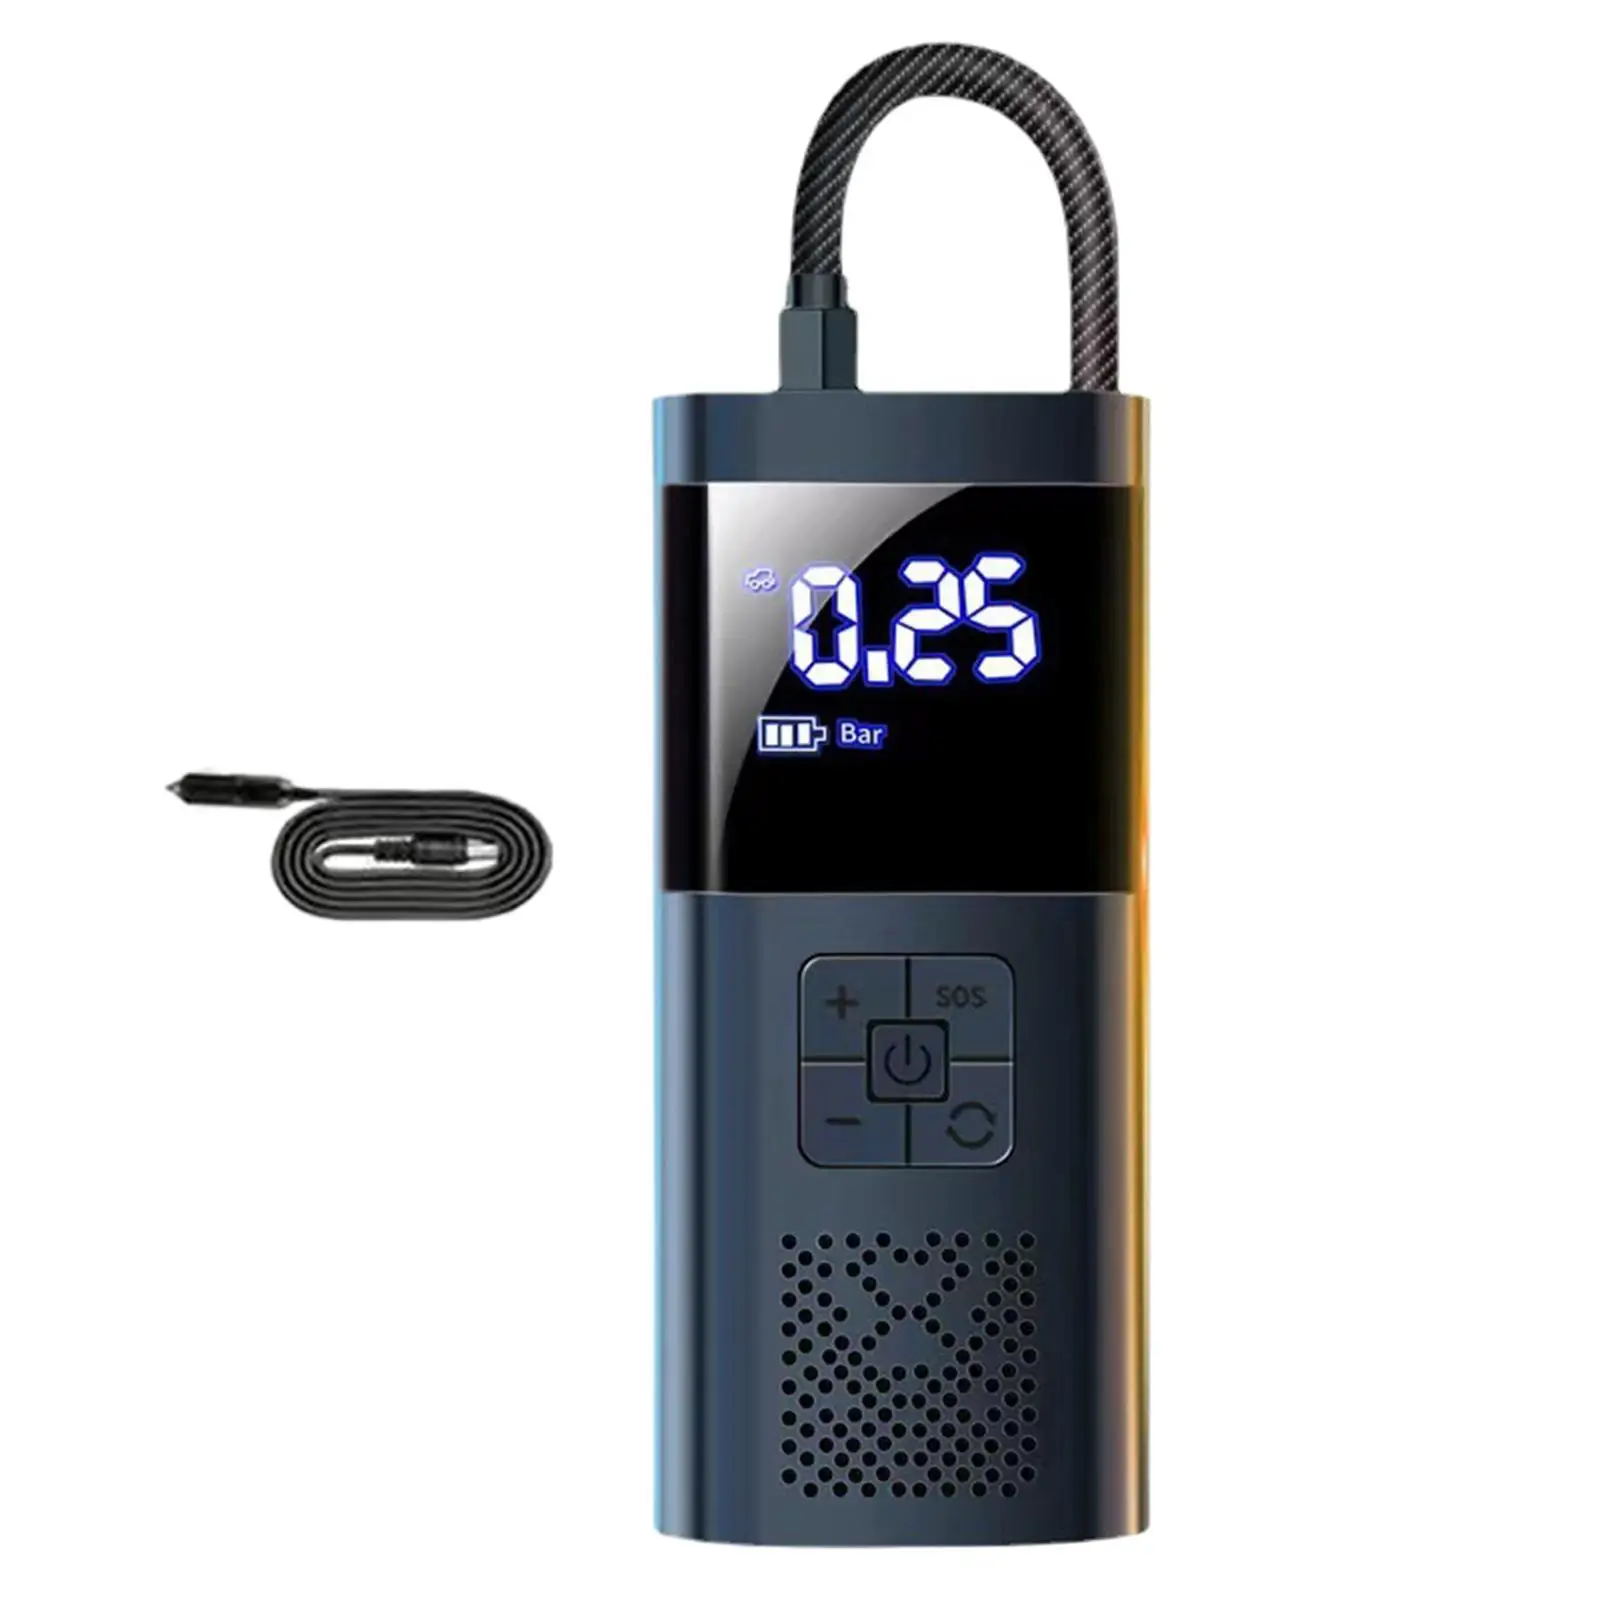 Electrical Air Pump Intelligent Digital Display with Light for Vehicle